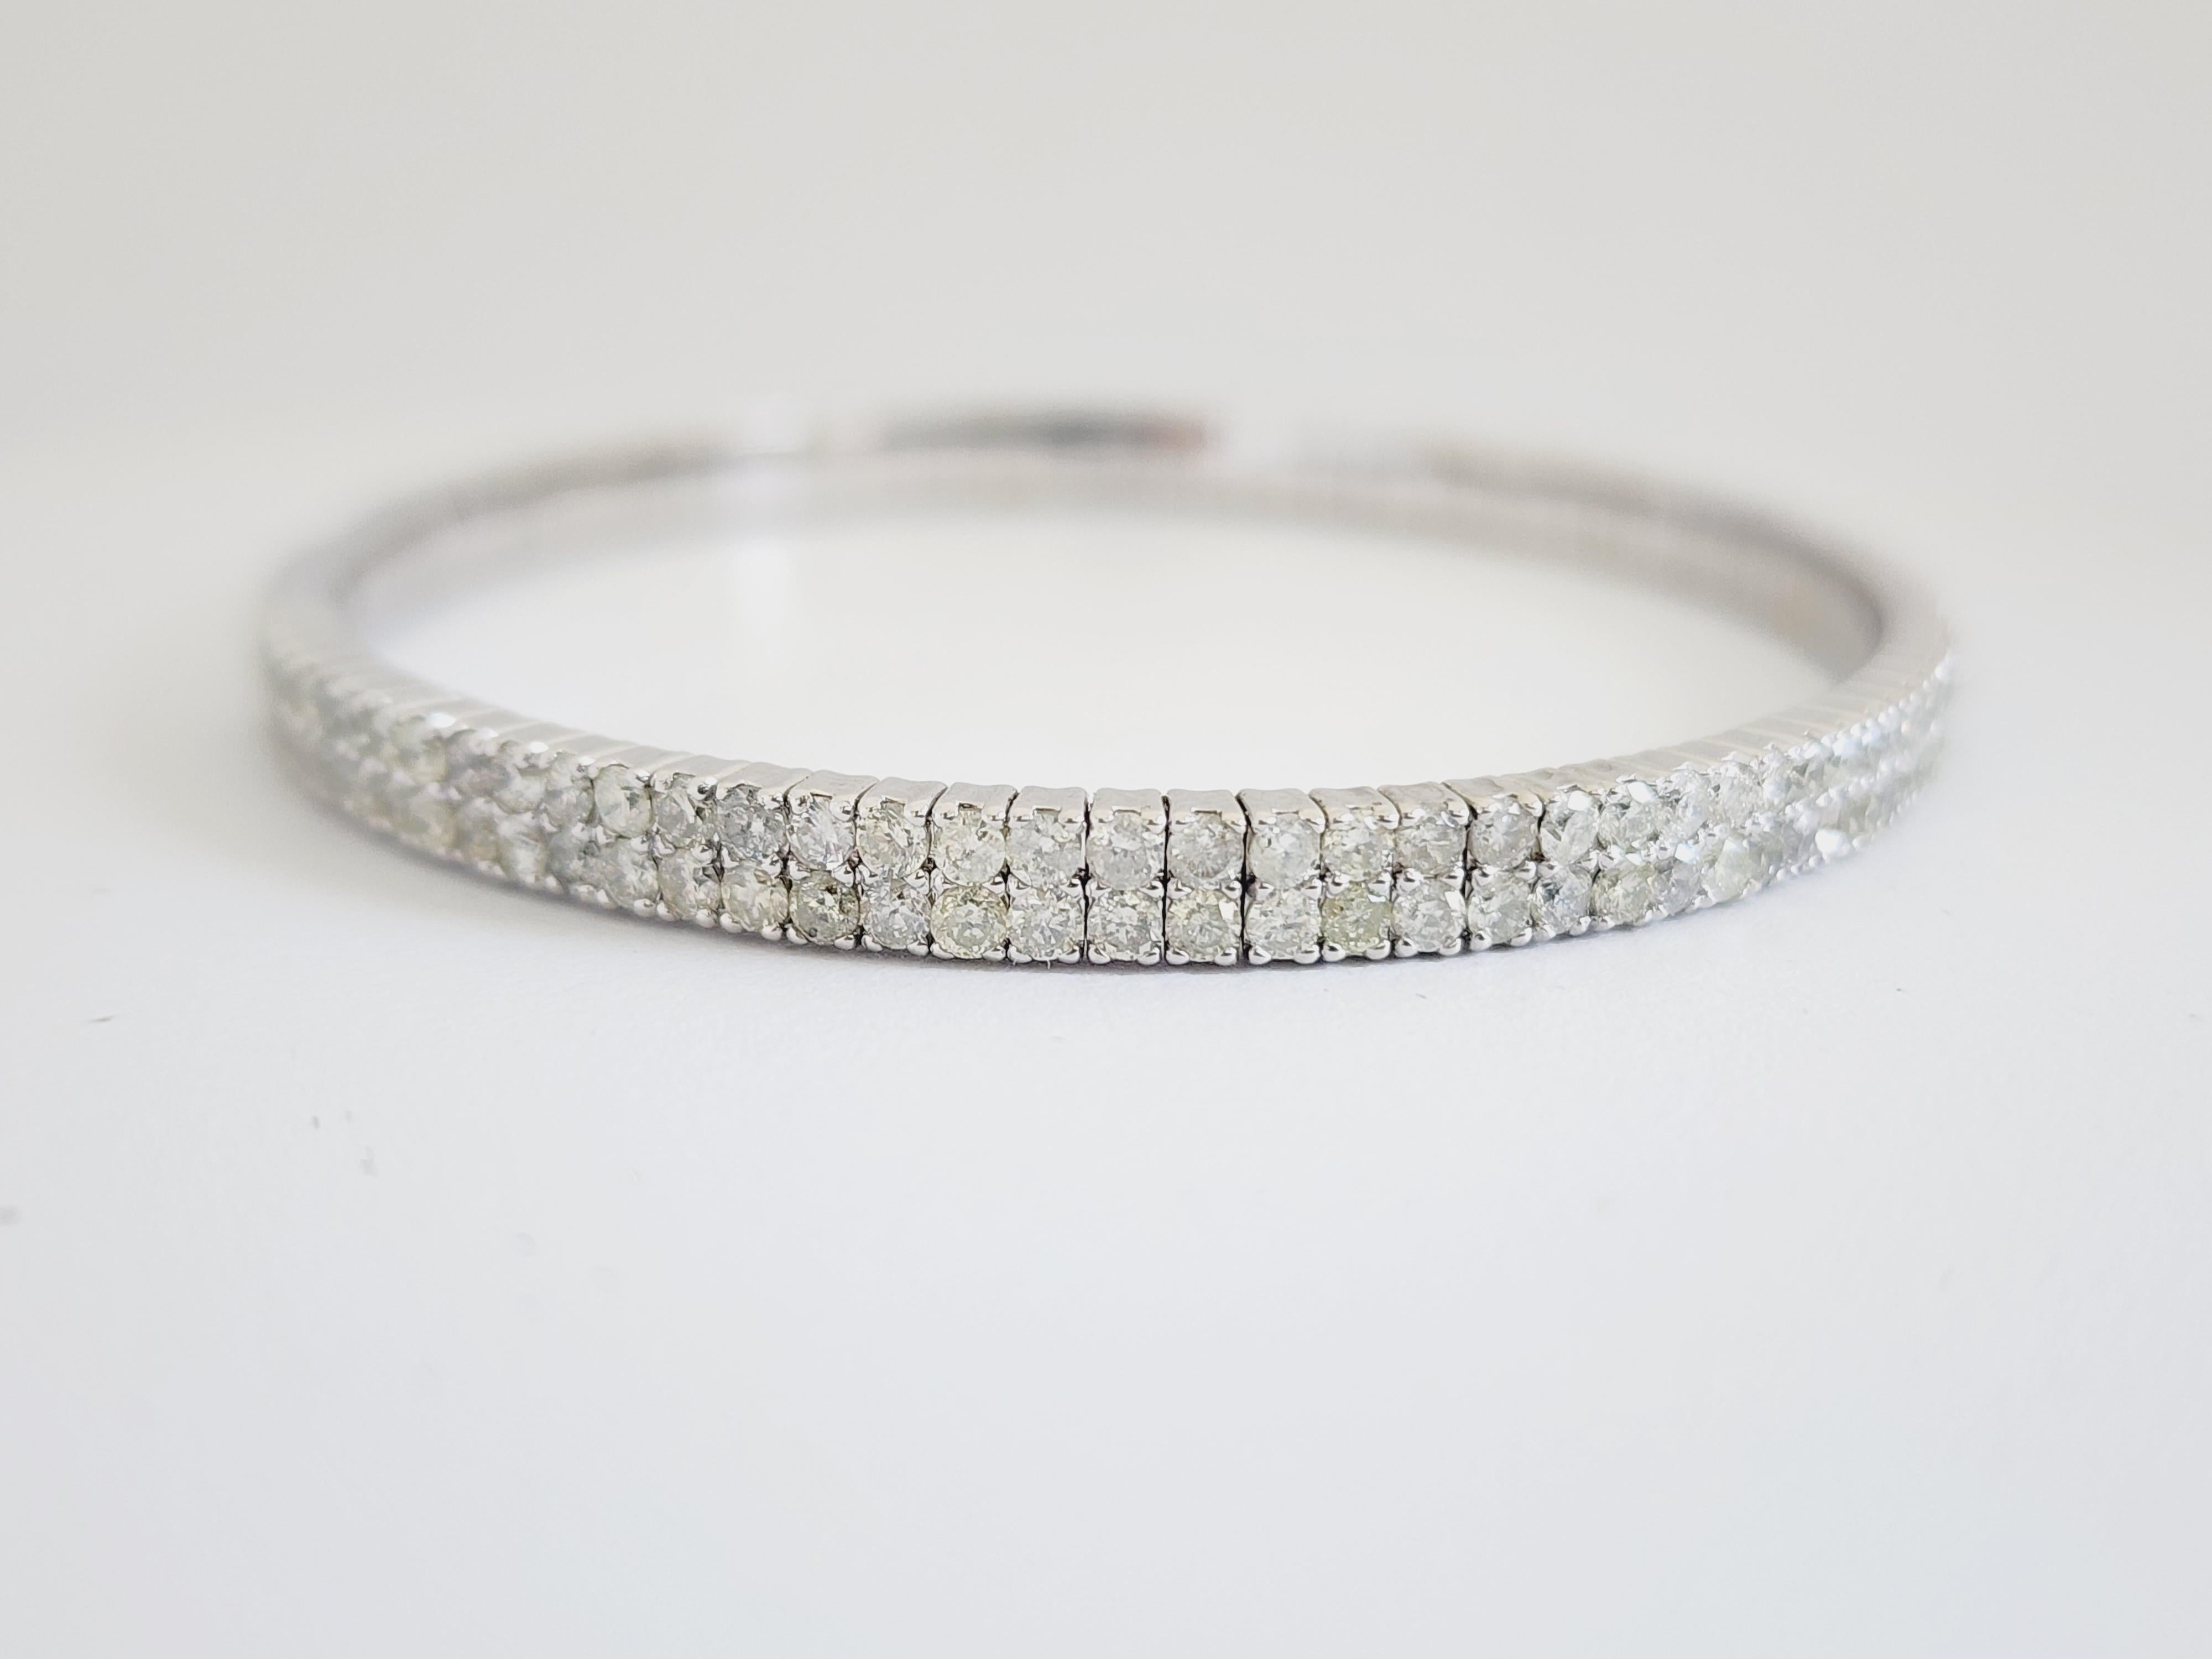 4.87 Carat Double Row Flexible Bangle White Gold 14 Karat Bracelet In New Condition For Sale In Great Neck, NY